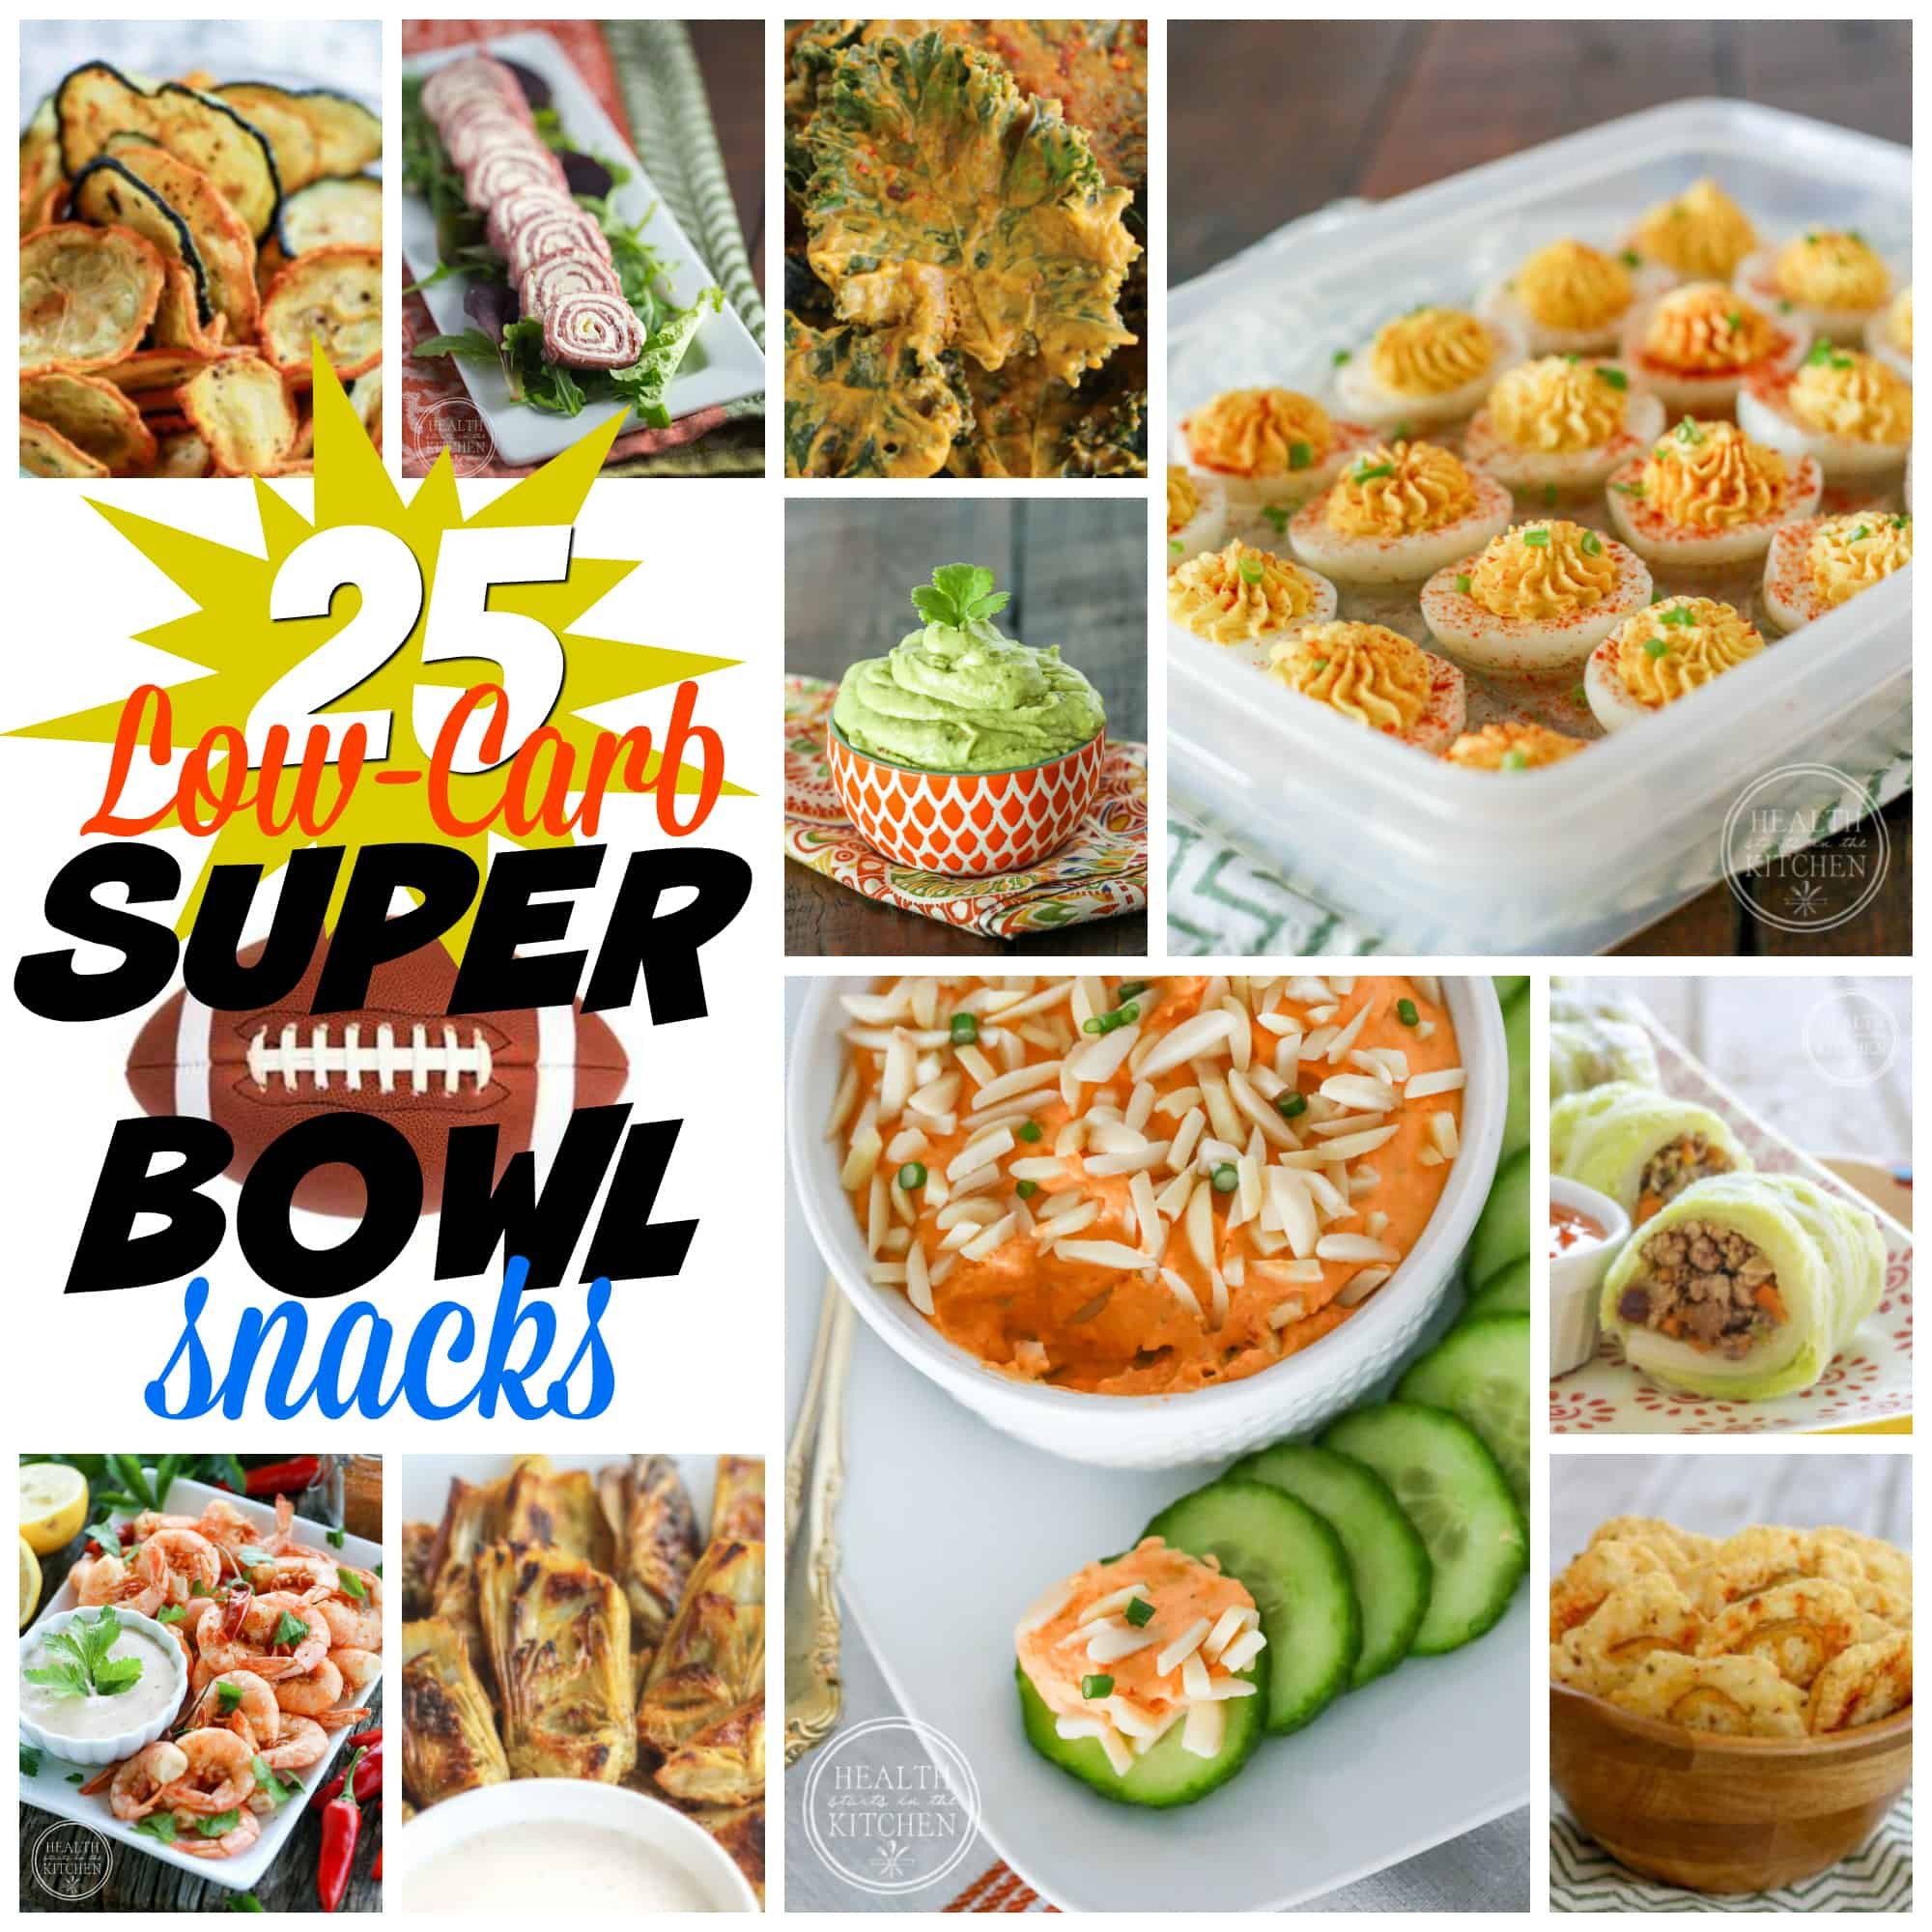 Low Carb Diet Snacks Healthy
 25 Low Carb Super Bowl Snacks Health Starts in the Kitchen